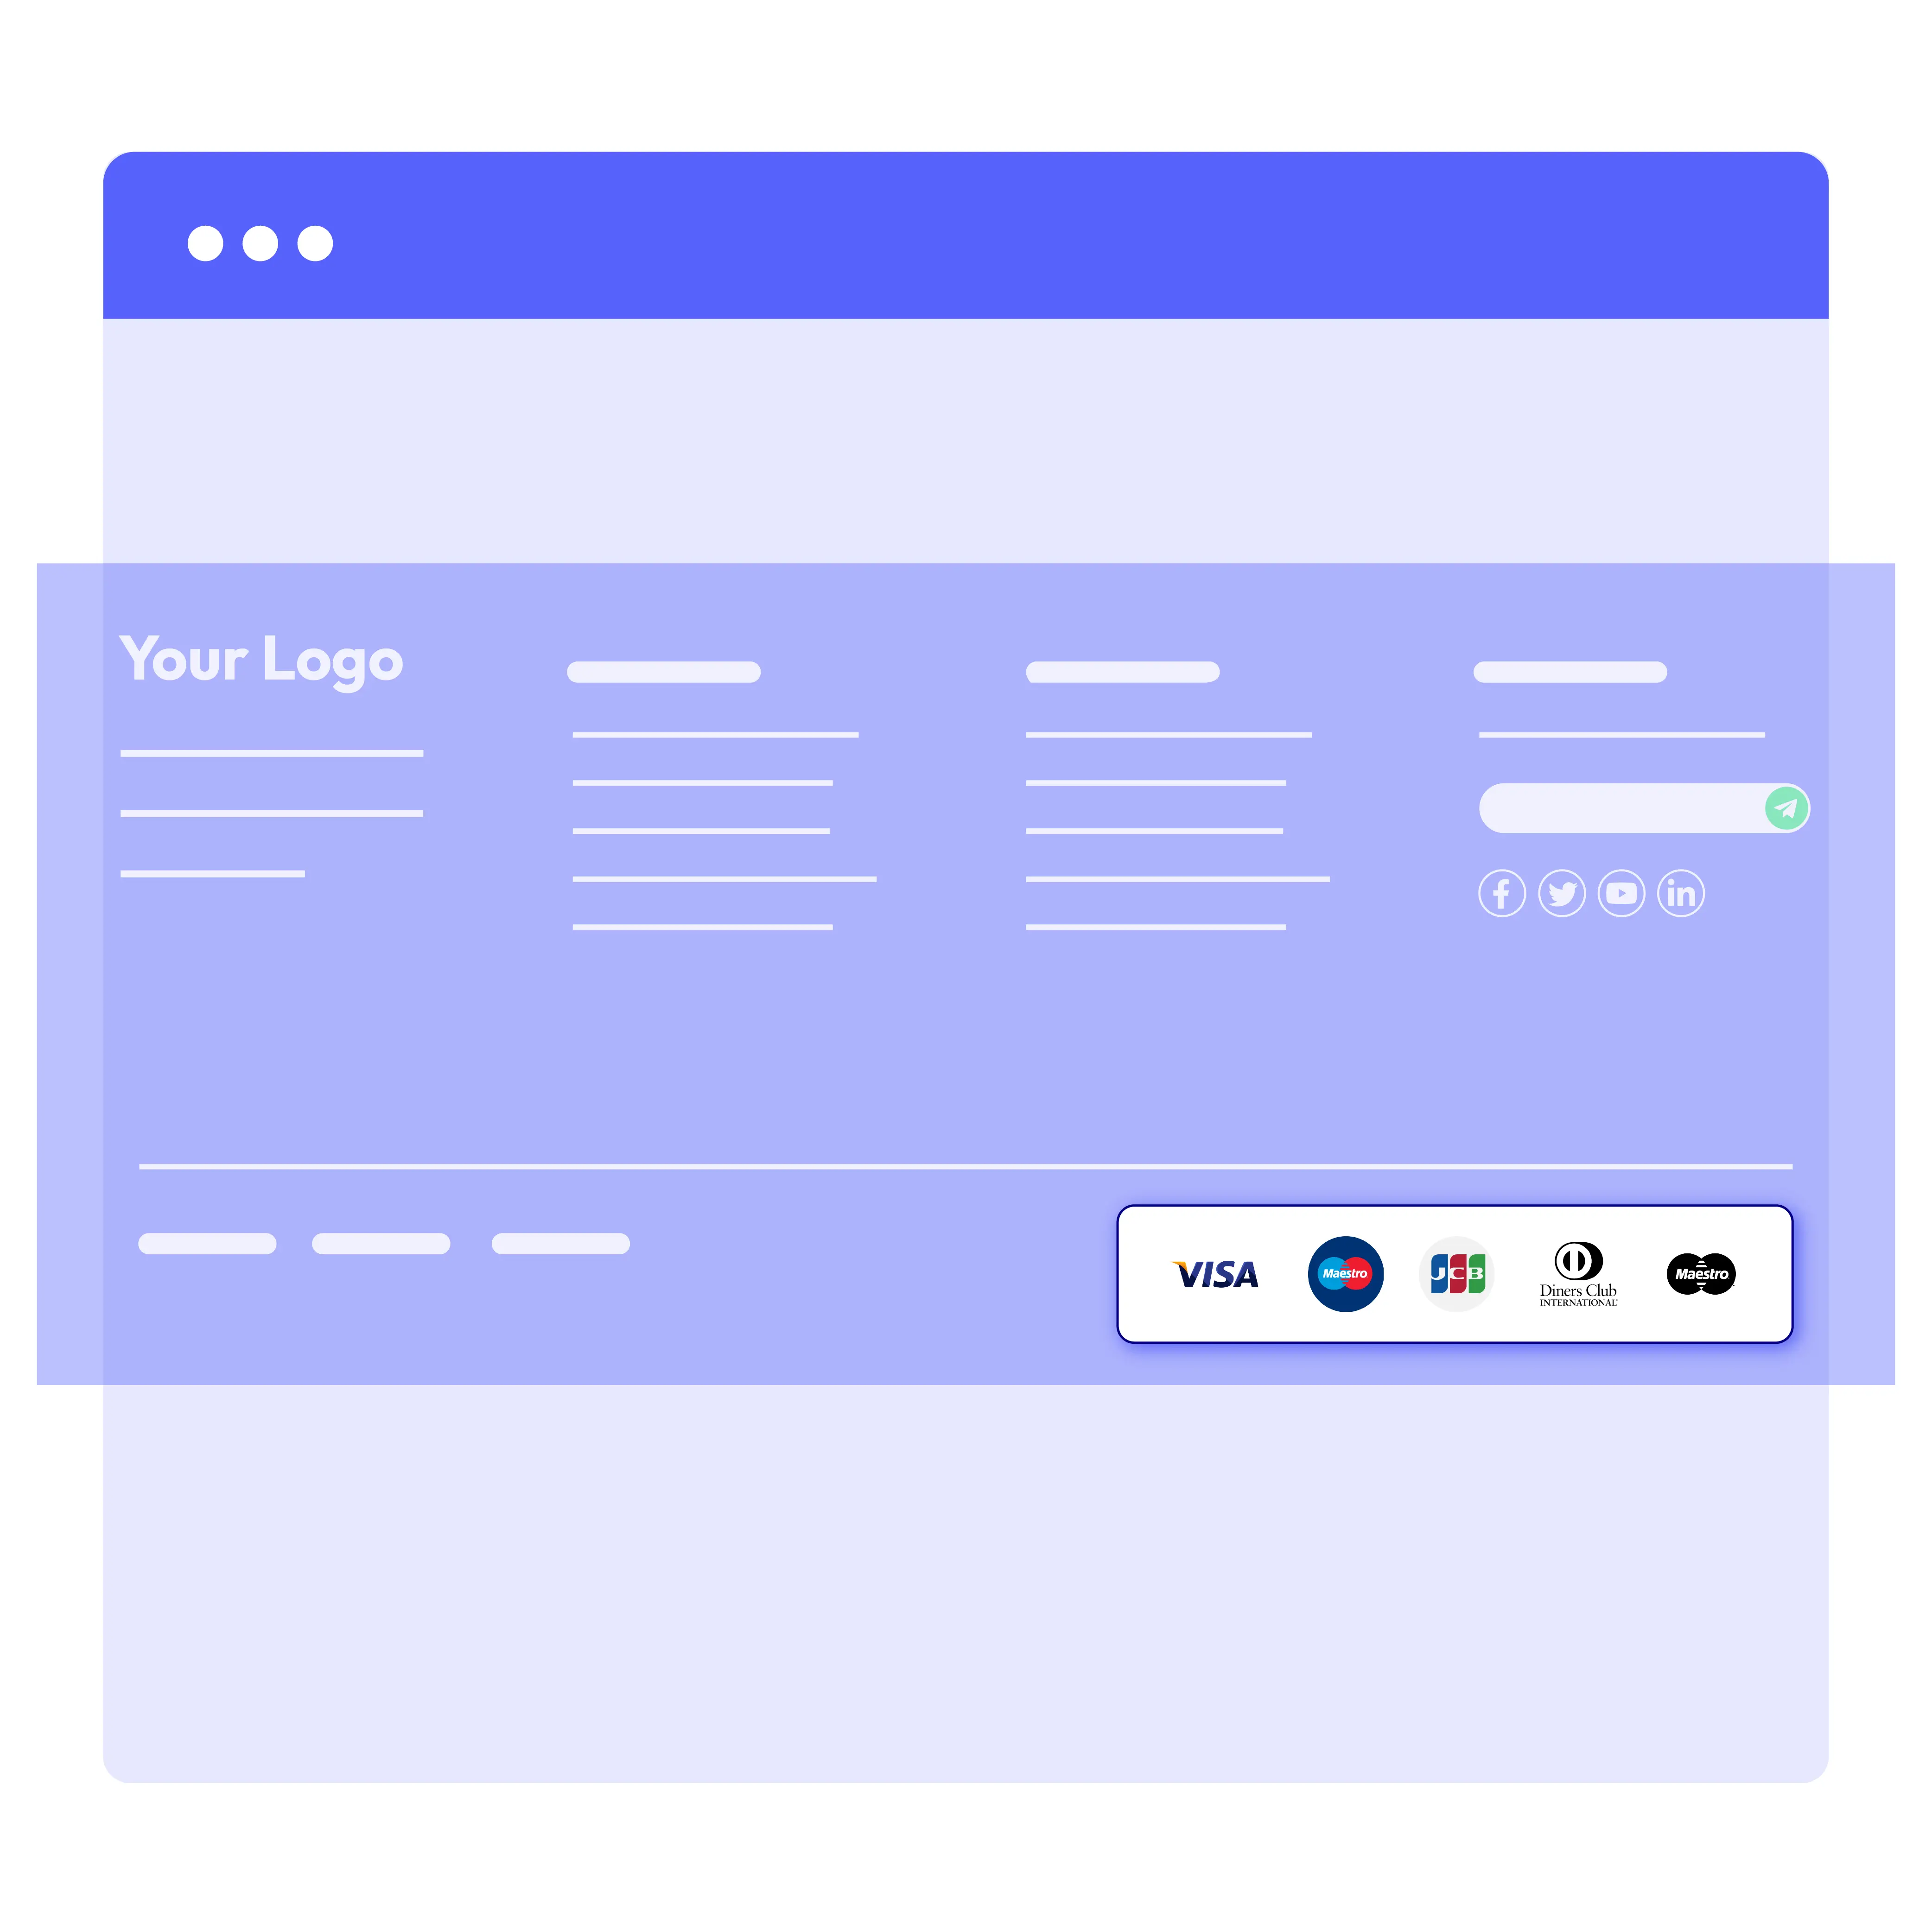 Add payment icons to footer